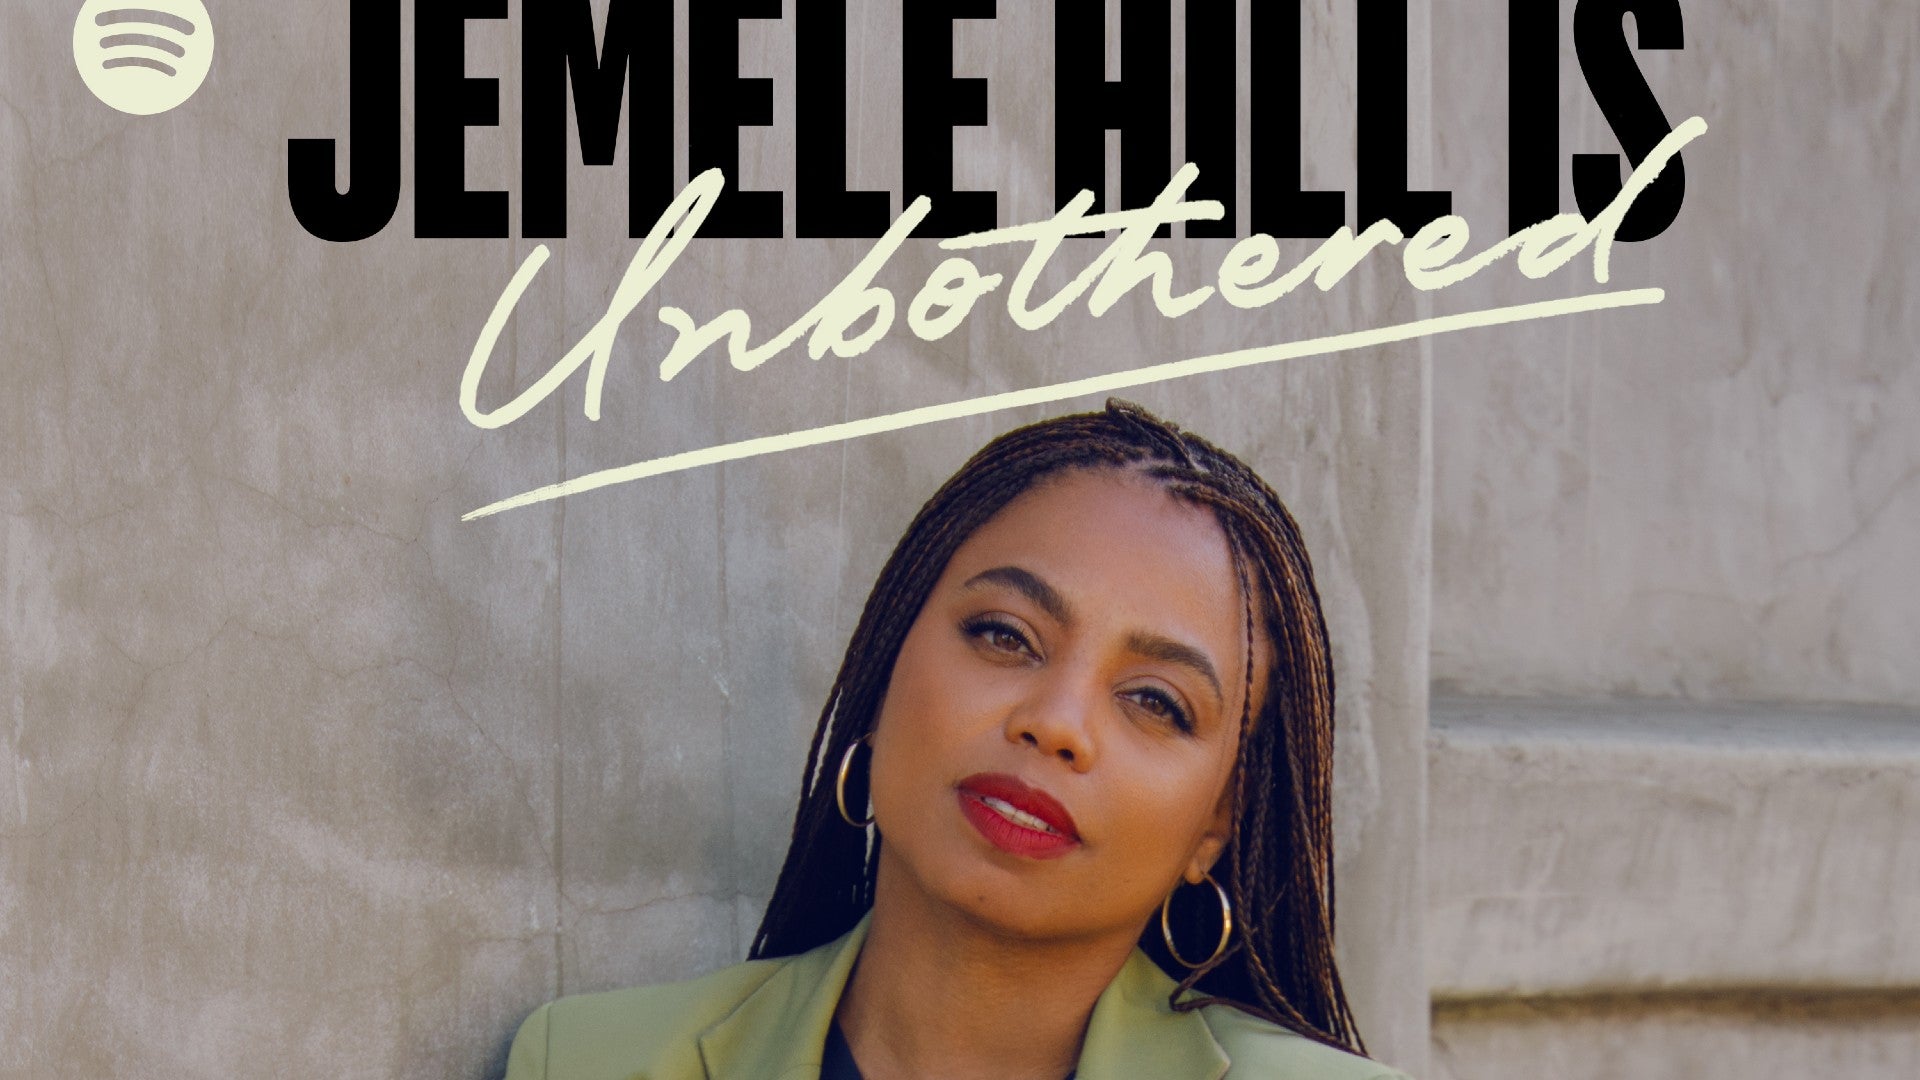 EXCLUSIVE: Jemele Hill Announces Mary J. Blige as First Guest on 3rd Season of Her Podcast "Jemele Hill is Unbothered"